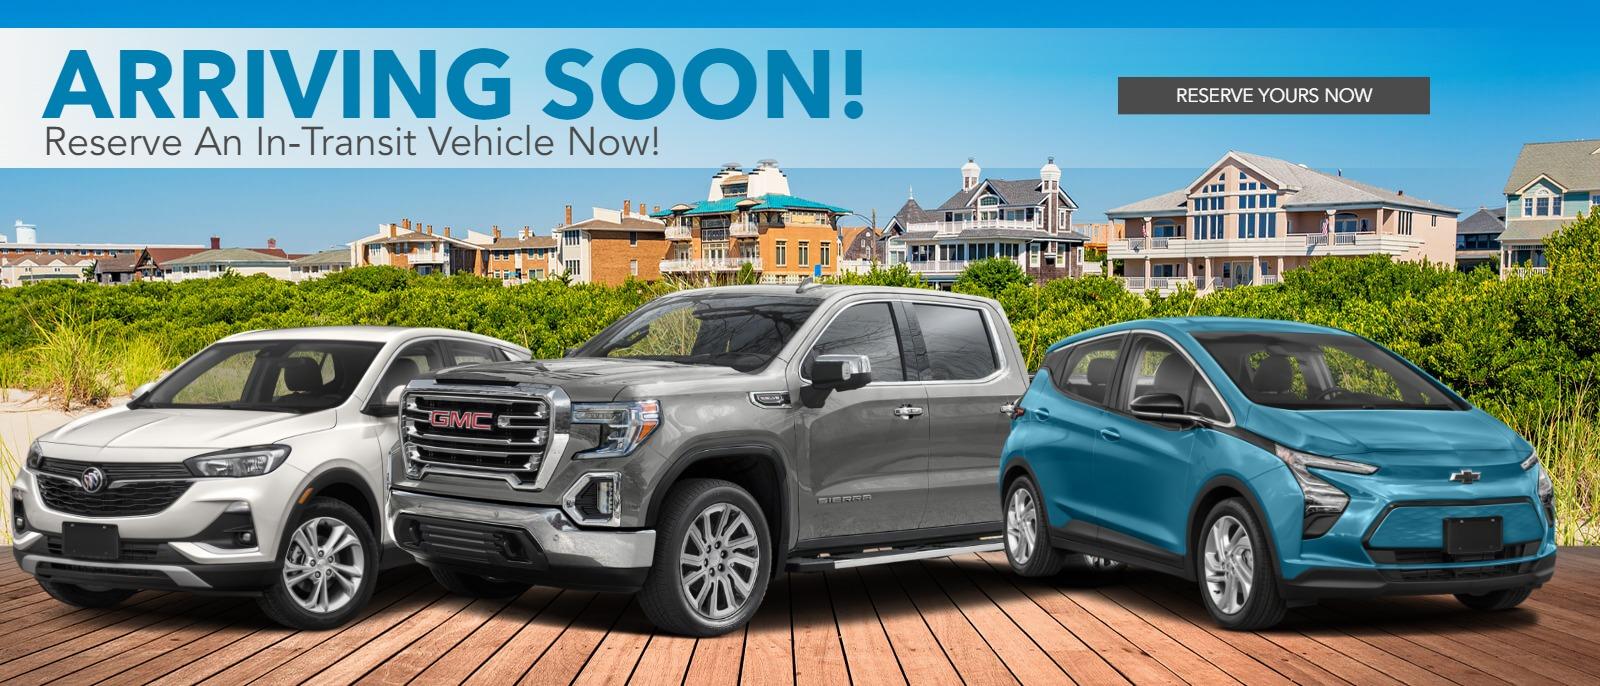 ARRIVING SOON!
Reserve An In-Transit Vehicle Now!